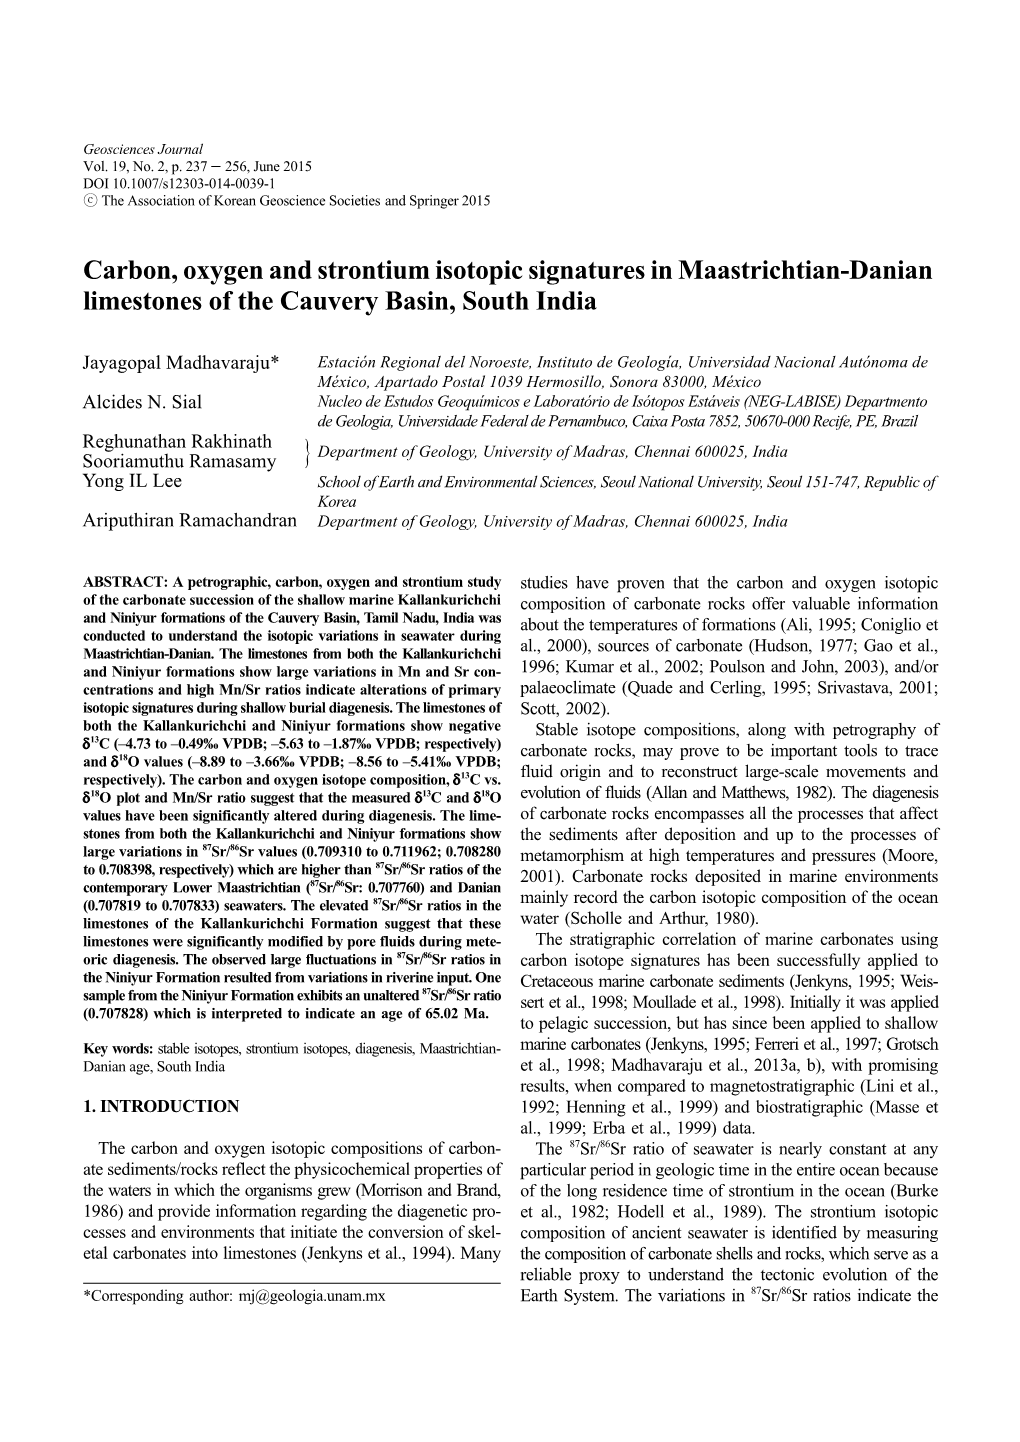 Carbon, Oxygen and Strontium Isotopic Signatures in Maastrichtian-Danian Limestones of the Cauvery Basin, South India